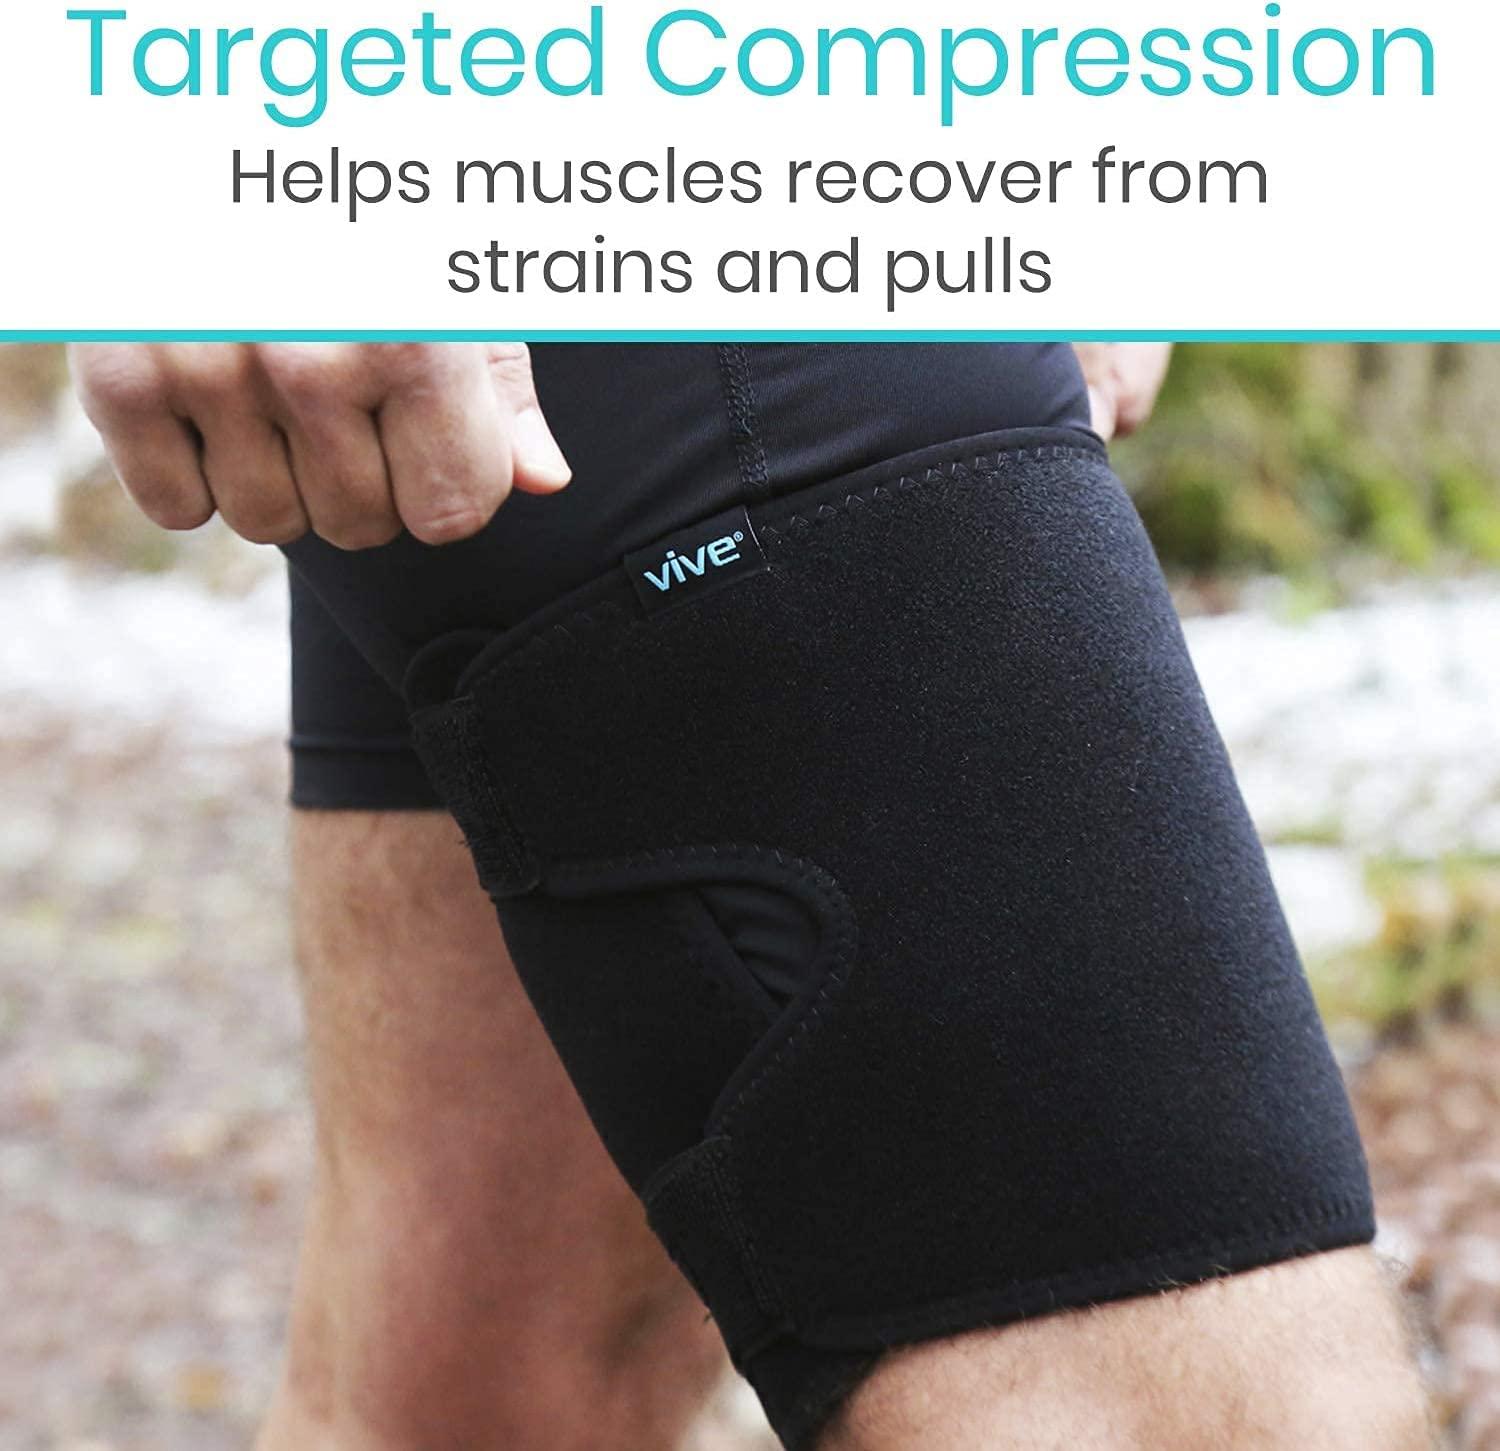 supregear Thigh Wraps Support, Adjustable Compression Neoprene Thigh Sleeve  Hamstring Quad Wrap Upper Leg Brace for Women Men Pulled Groin Muscle